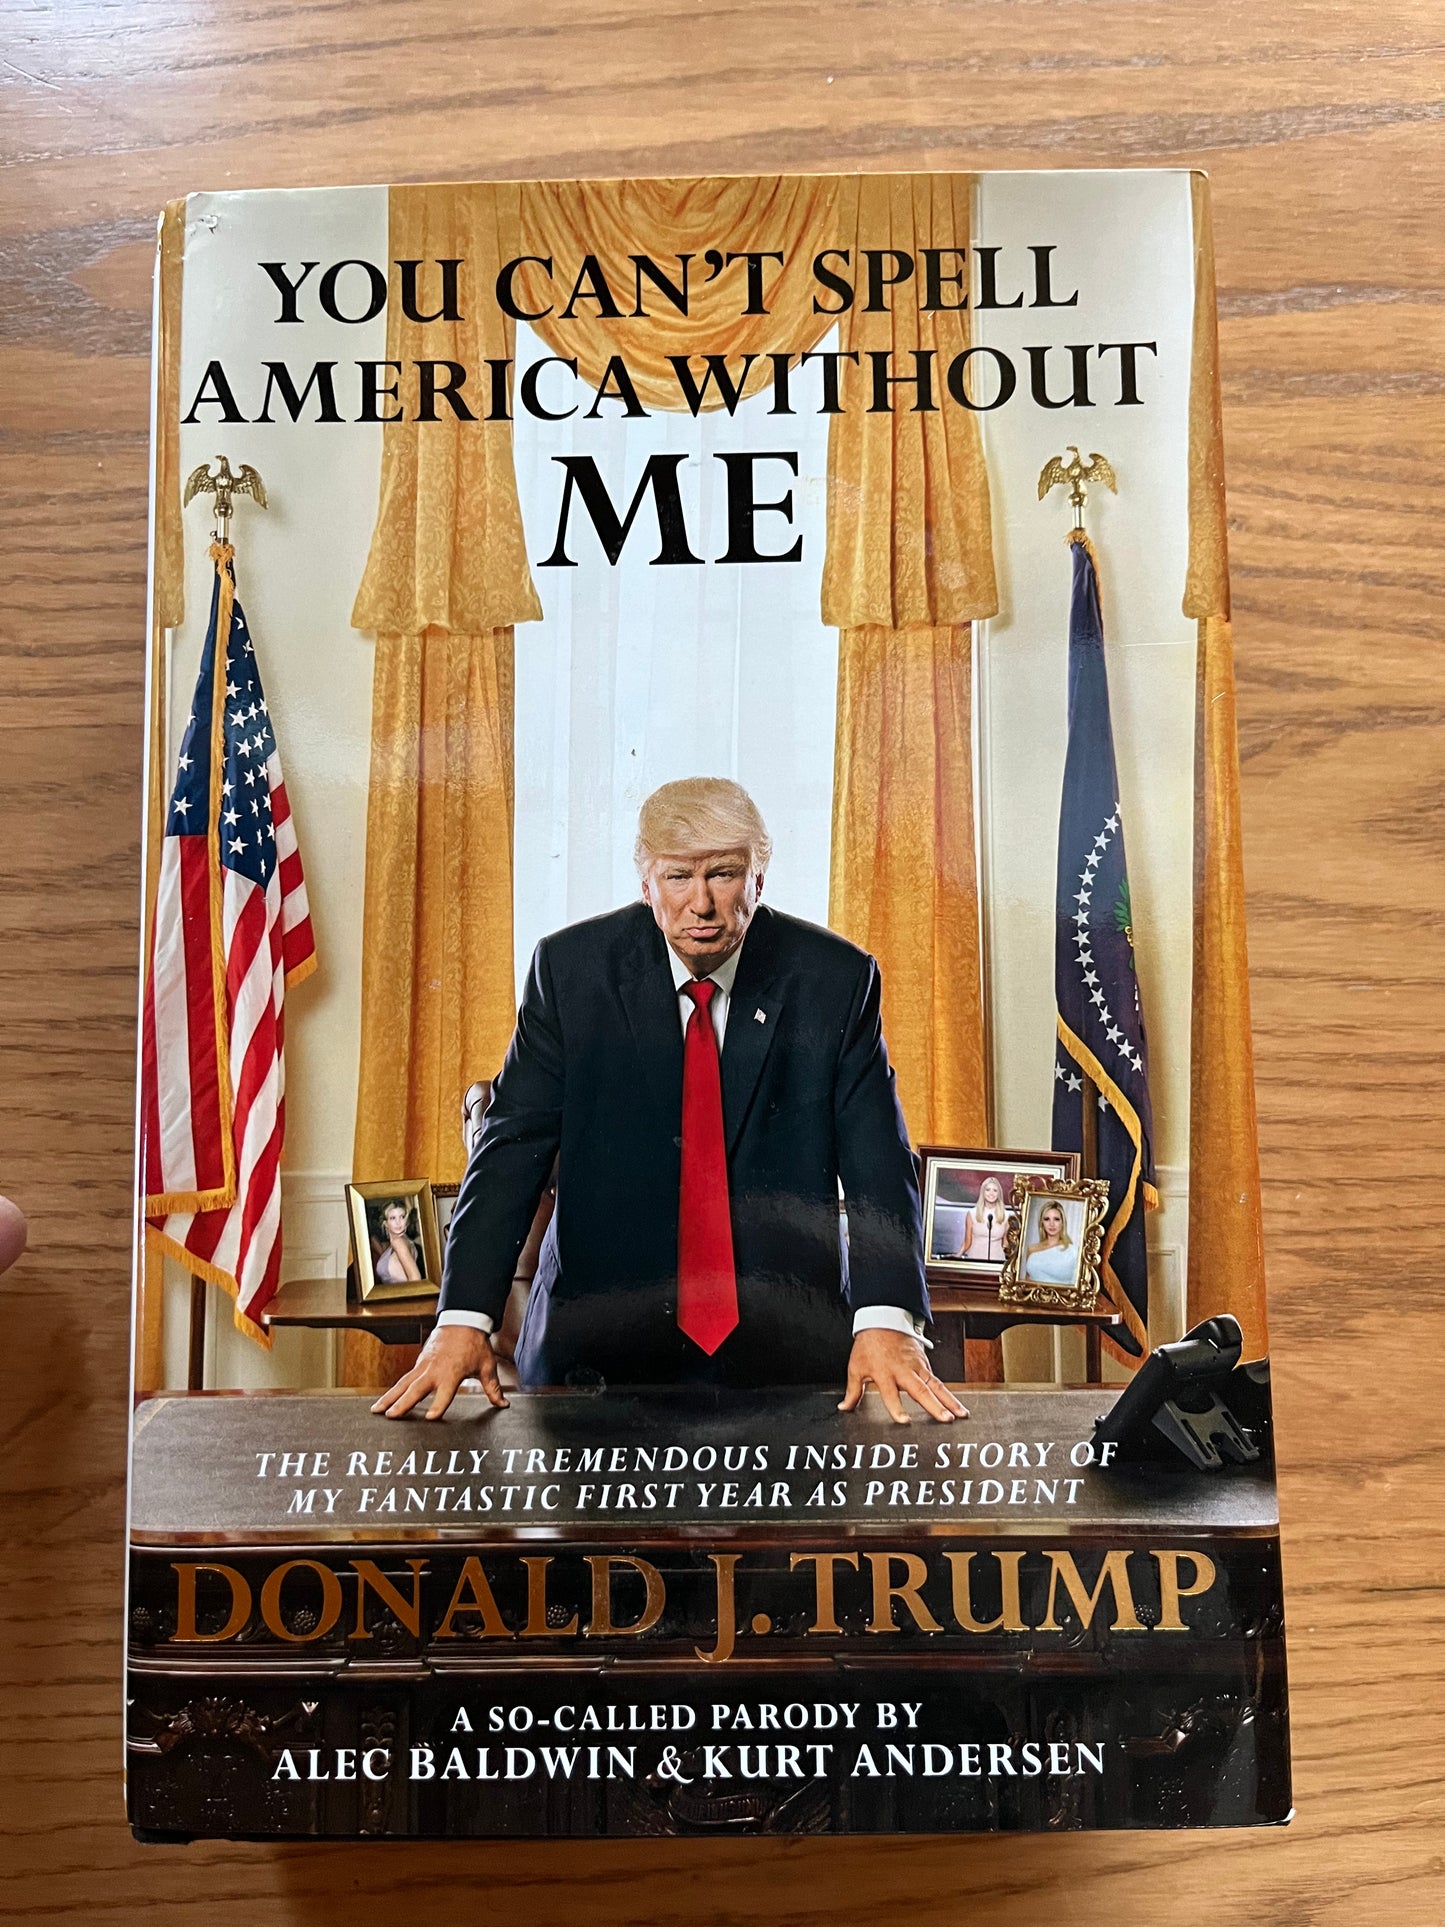 ALEC BALDWIN, YOU CAN'T SPELL AMERICA WITHOUT ME (autographed book)